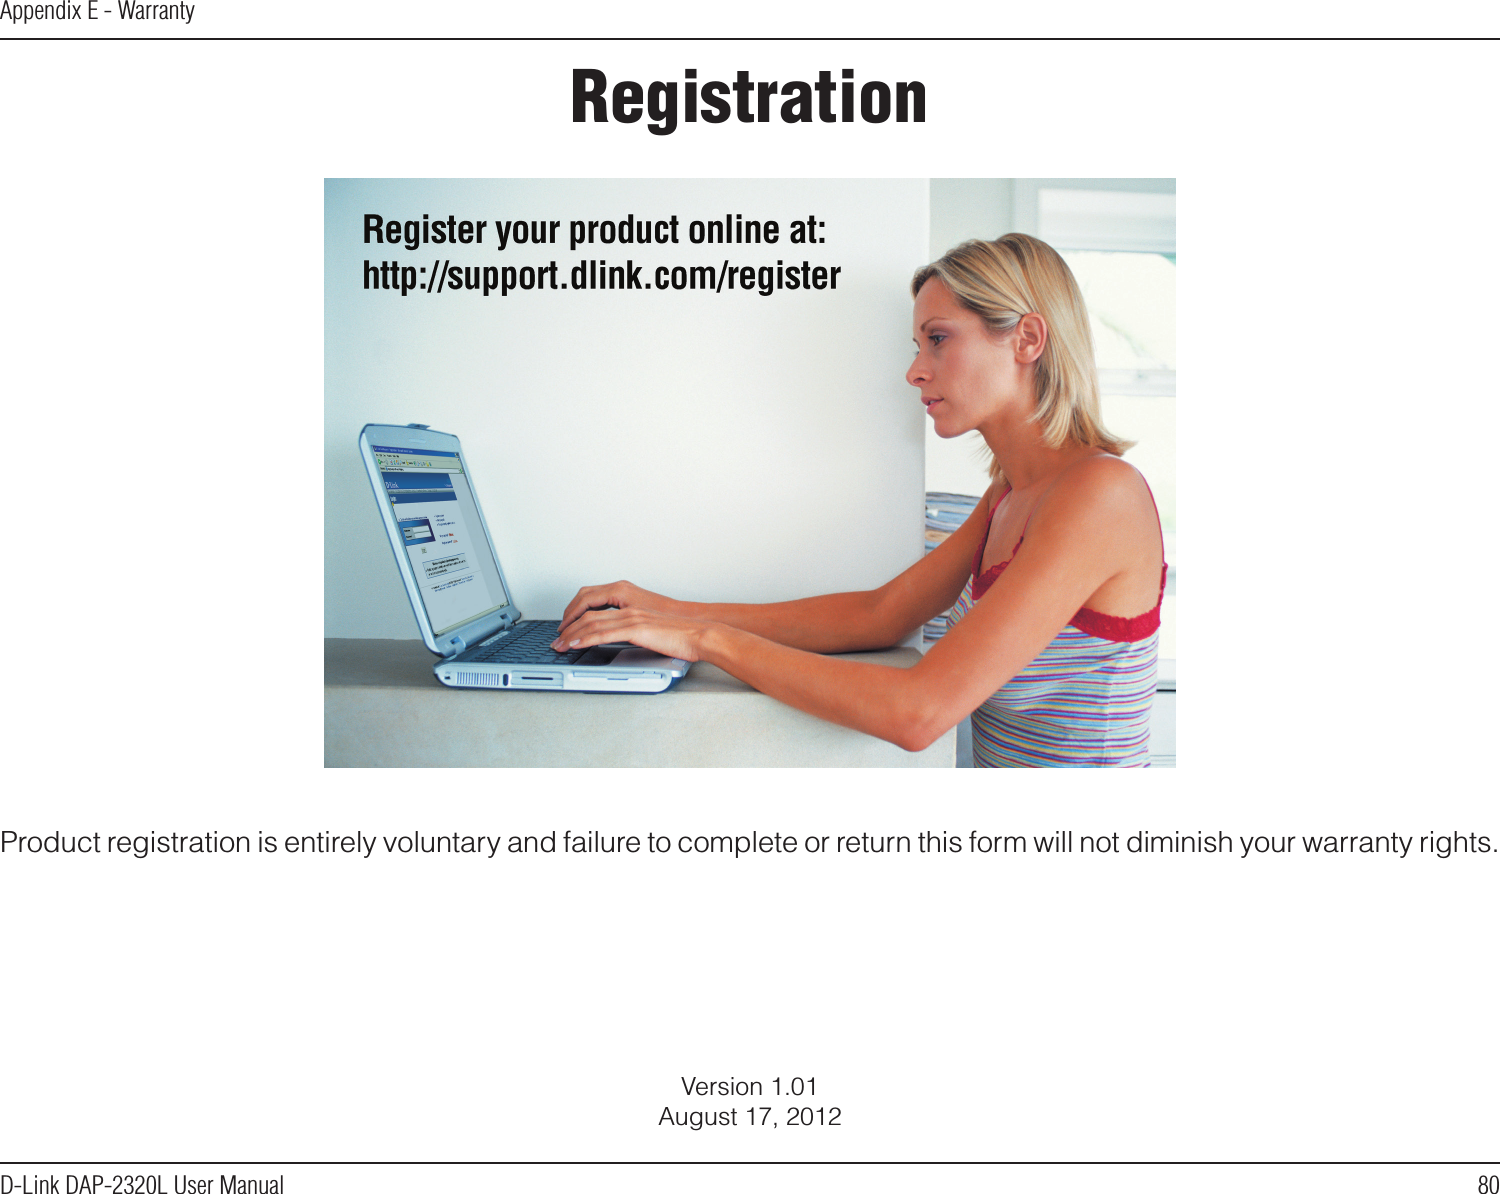 80D-Link DAP-2320L User ManualAppendix E - WarrantyVersion 1.01August 17, 2012Product registration is entirely voluntary and failure to complete or return this form will not diminish your warranty rights.Registration